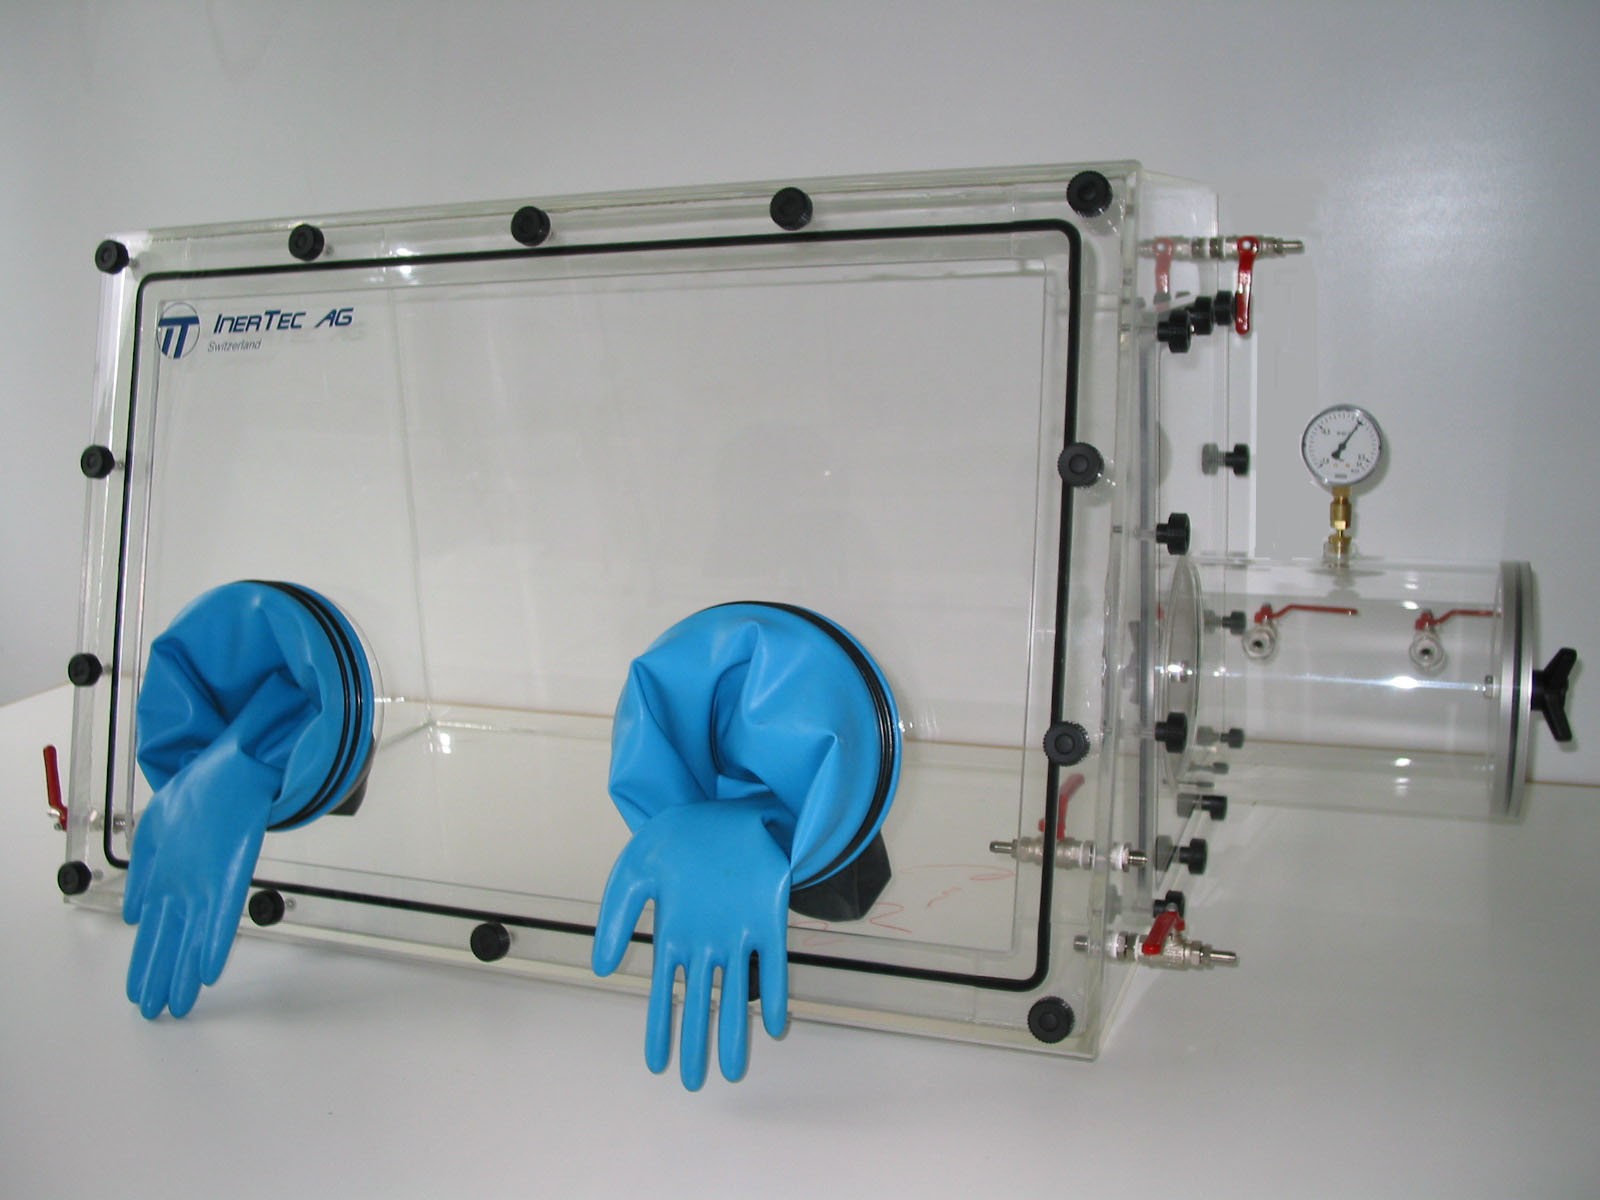 Glovebox made of acrylic&gt; Gas filling: by hand, front design: swivels upwards, side design: round vacuum lock, control: oxygen display